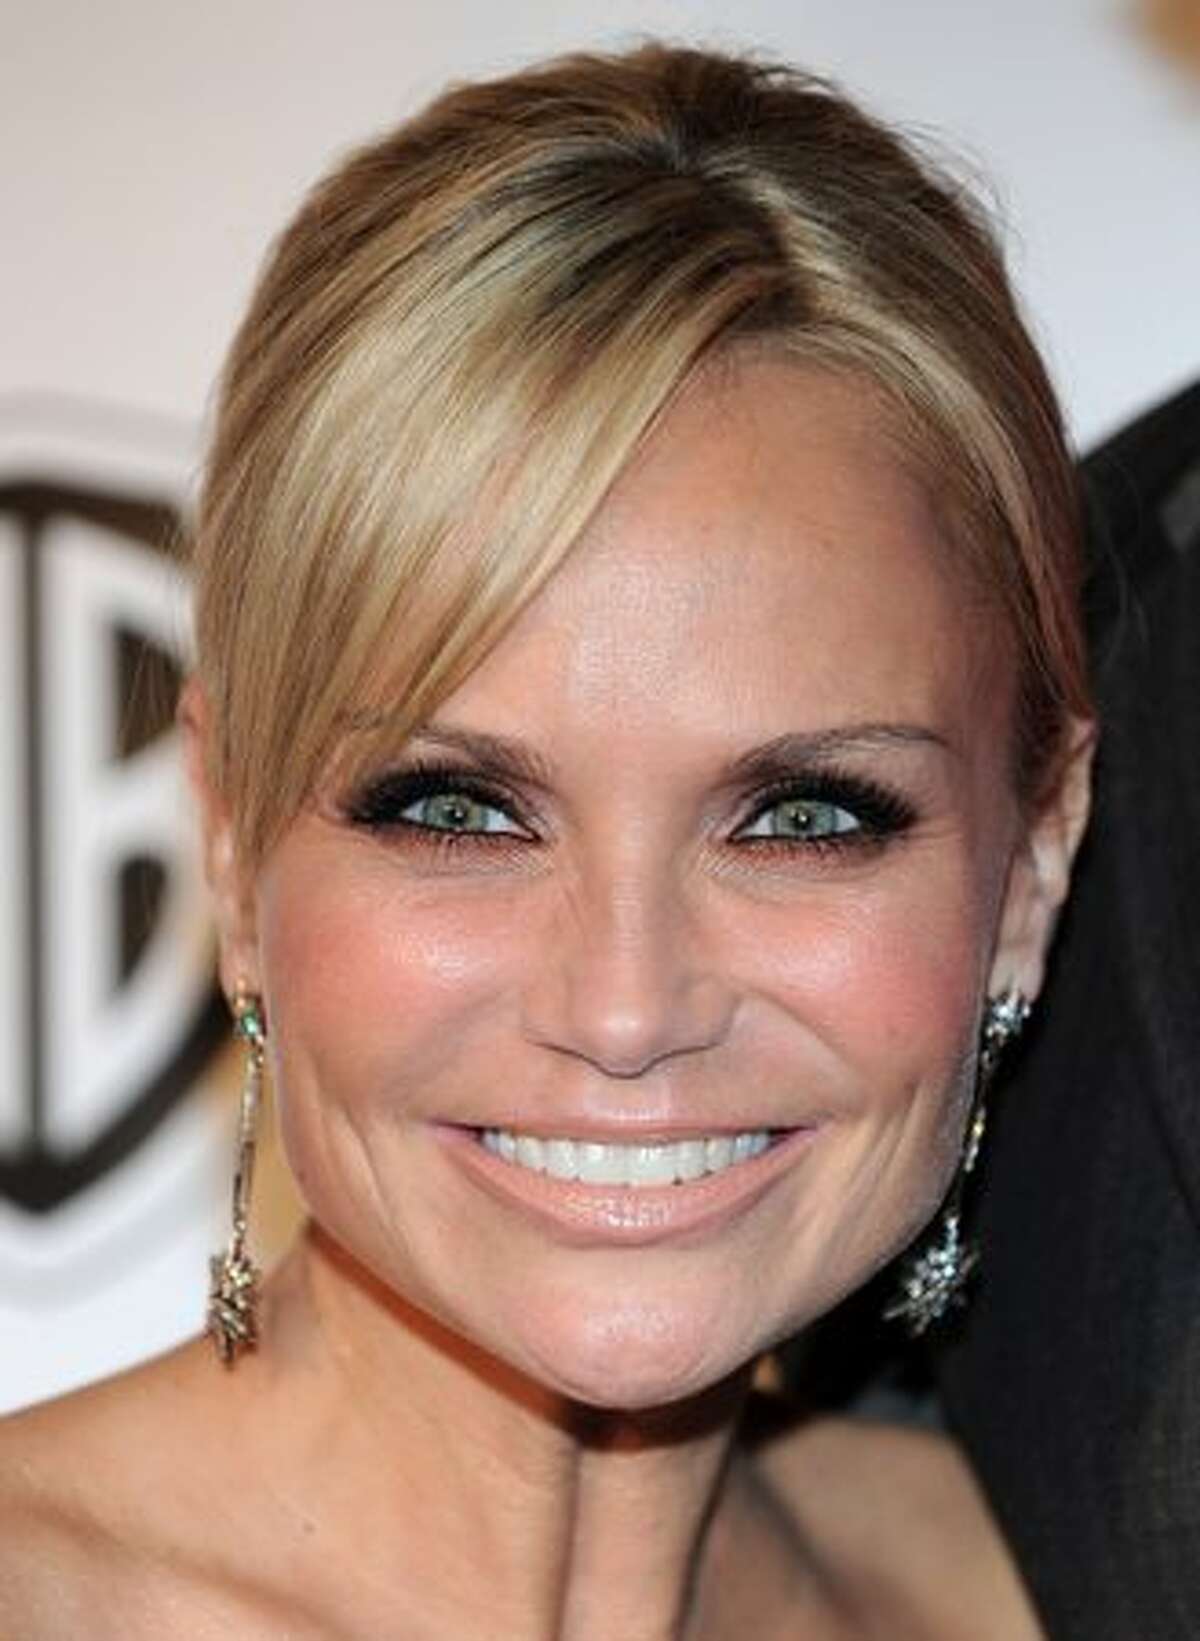 Actress/singer Kristin Chenoweth poses on the red carpet at the Geffen Playhouse's Annual Backstage at the Geffen Gala in Los Angeles, California.